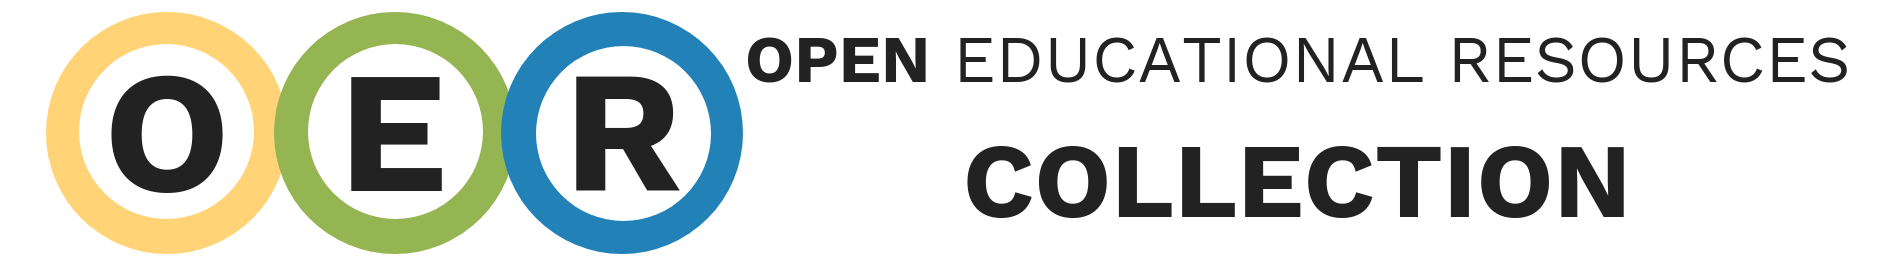 Open Education Resources Collection